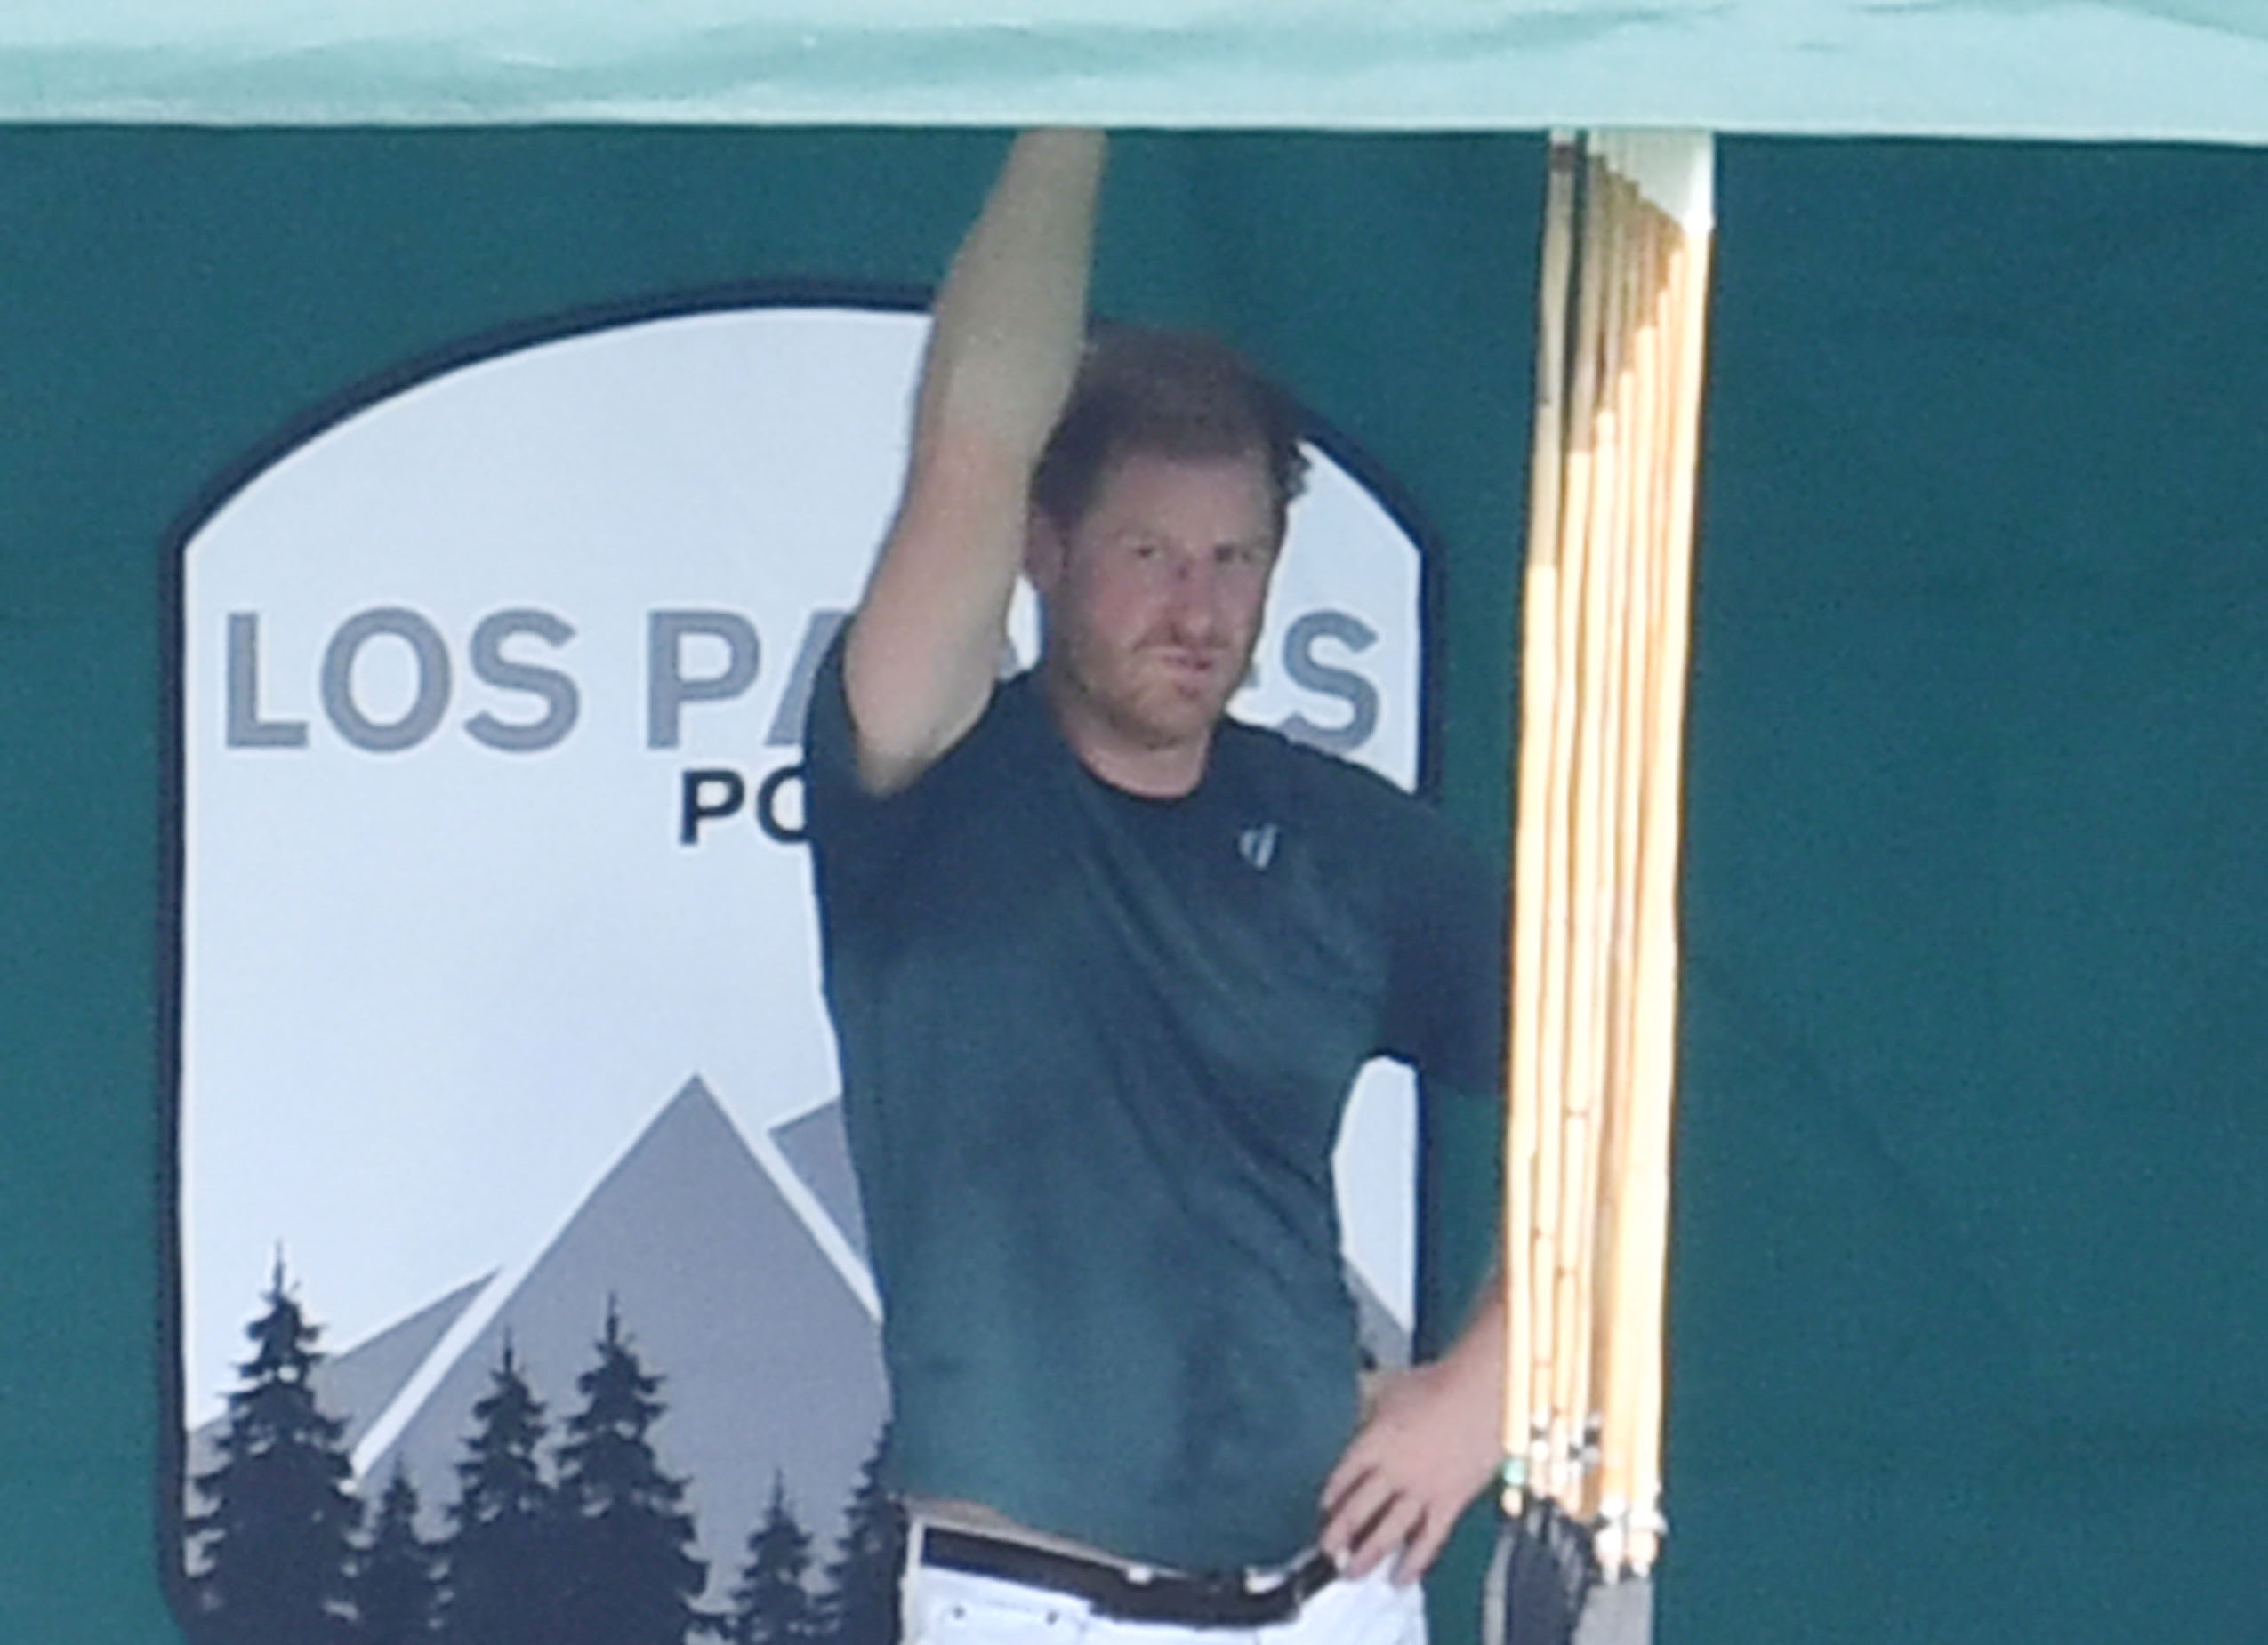 Prince Harry, who was reportedly upset with the treatment he received at the jubilee, standing at one of his polo matches in Santa Barbara, California